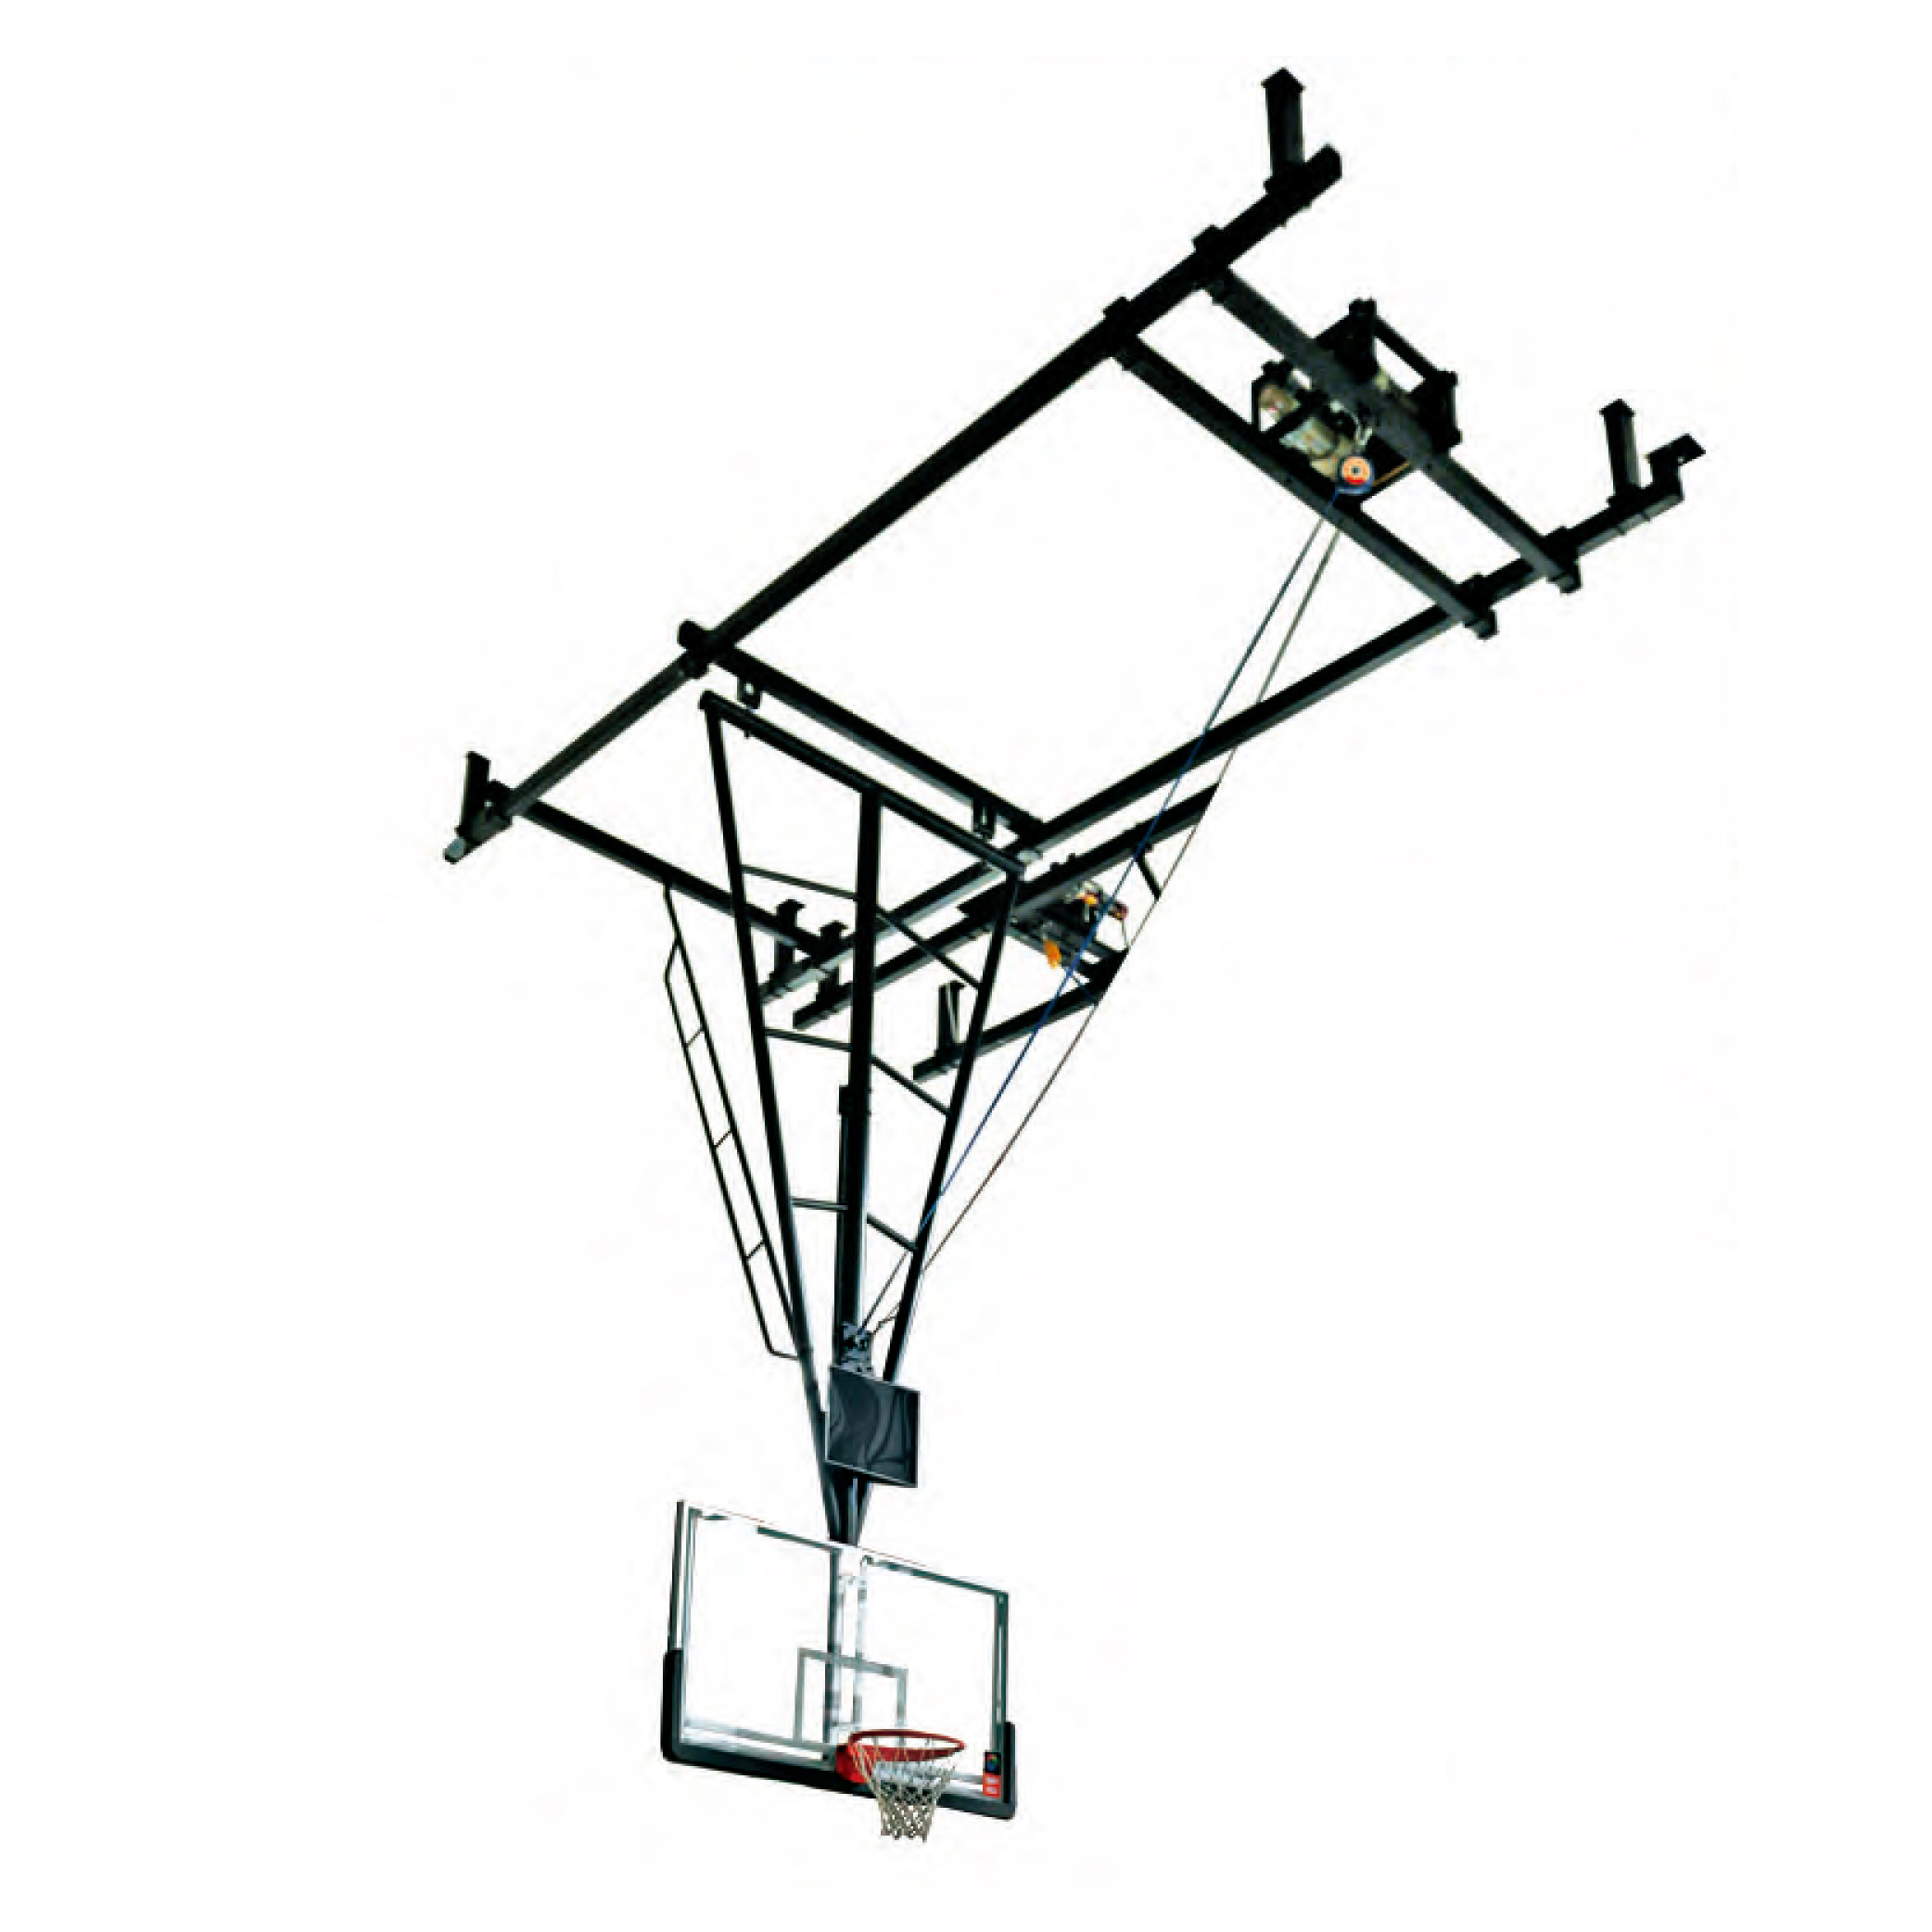 HKXB-1001 Electric suspended basketball stand (tube)